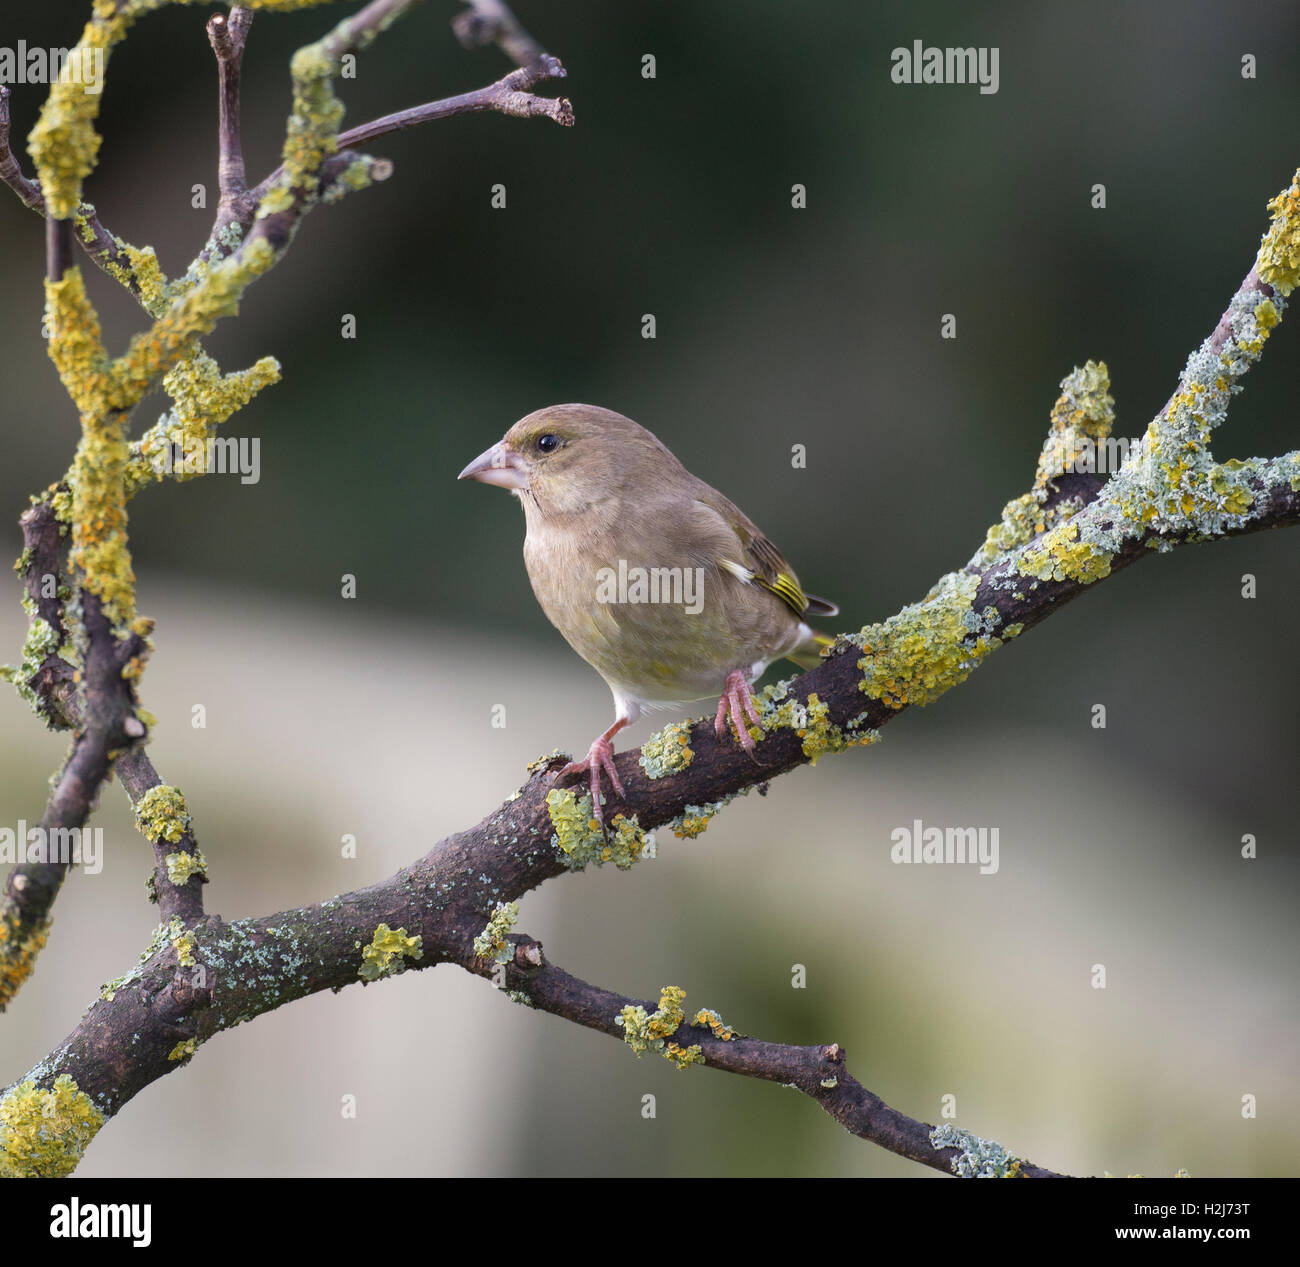 Female Greenfinch carduelis chloris on a branch in winter, Wales/Shropshire borders Stock Photo